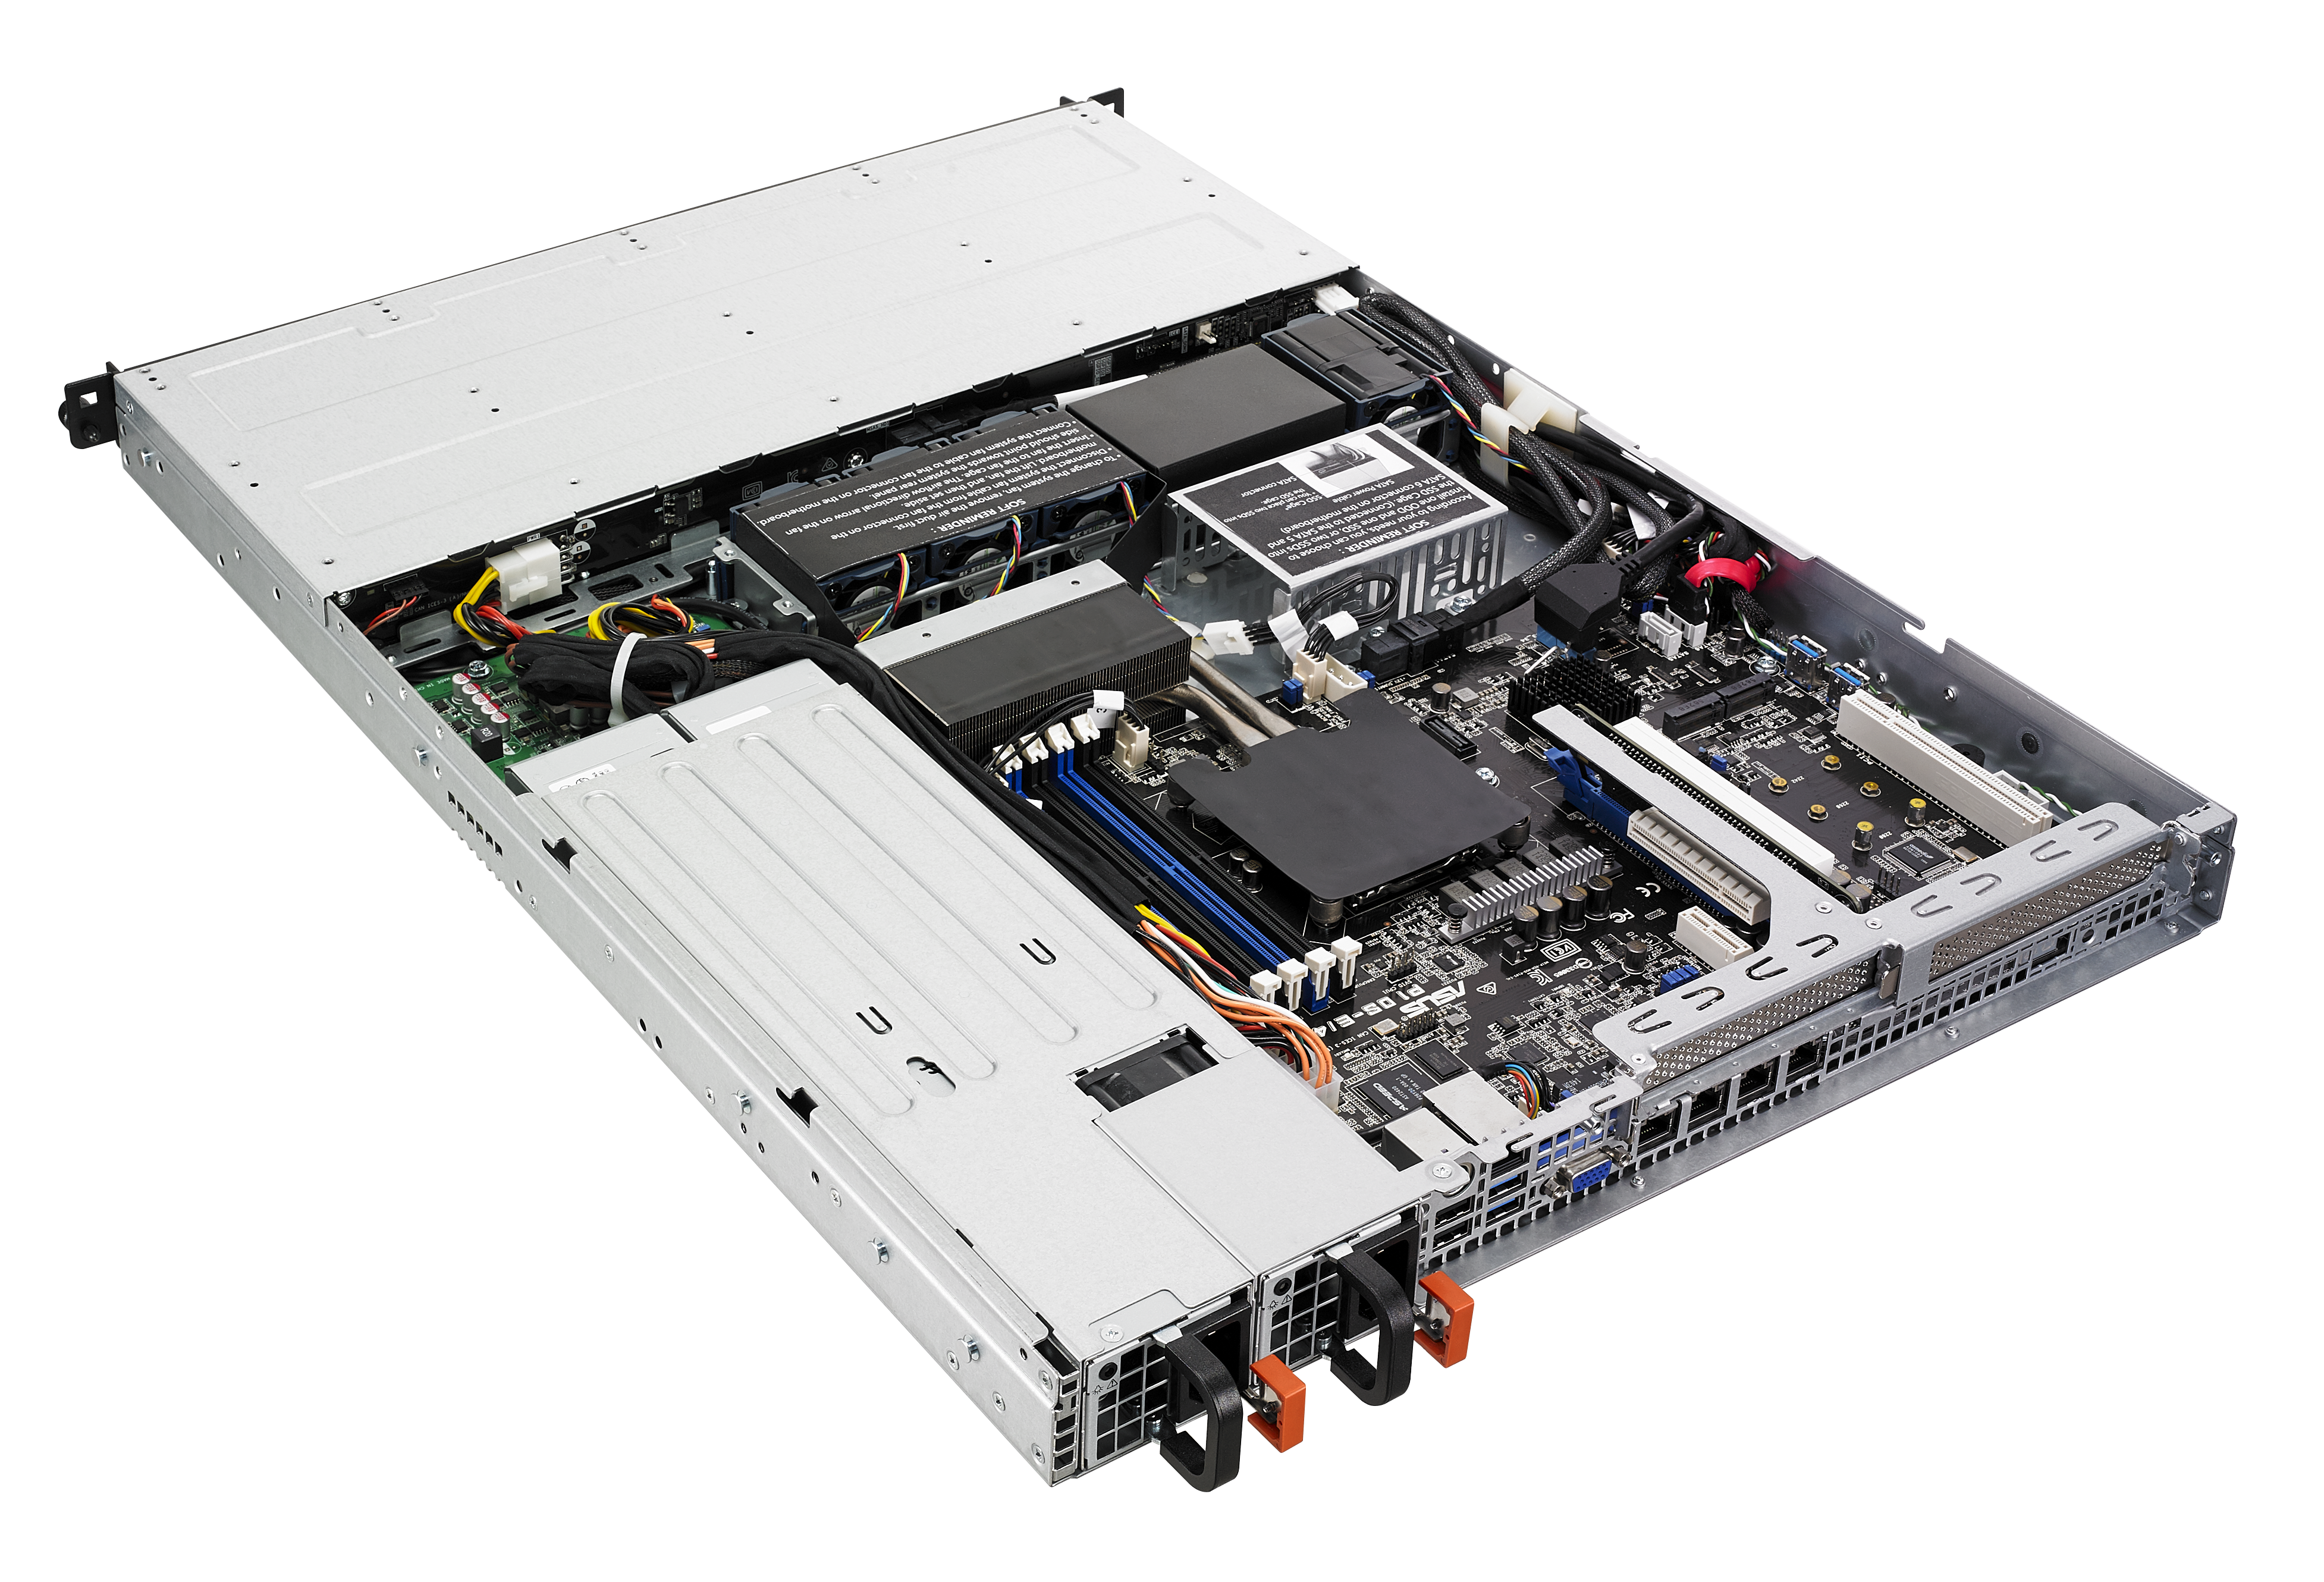 Server asus. ASUS rs500-e8. Серверная платформа ASUS rs300. Rs500-e8-rs4 v2. ASUS rs300-e9-ps4.